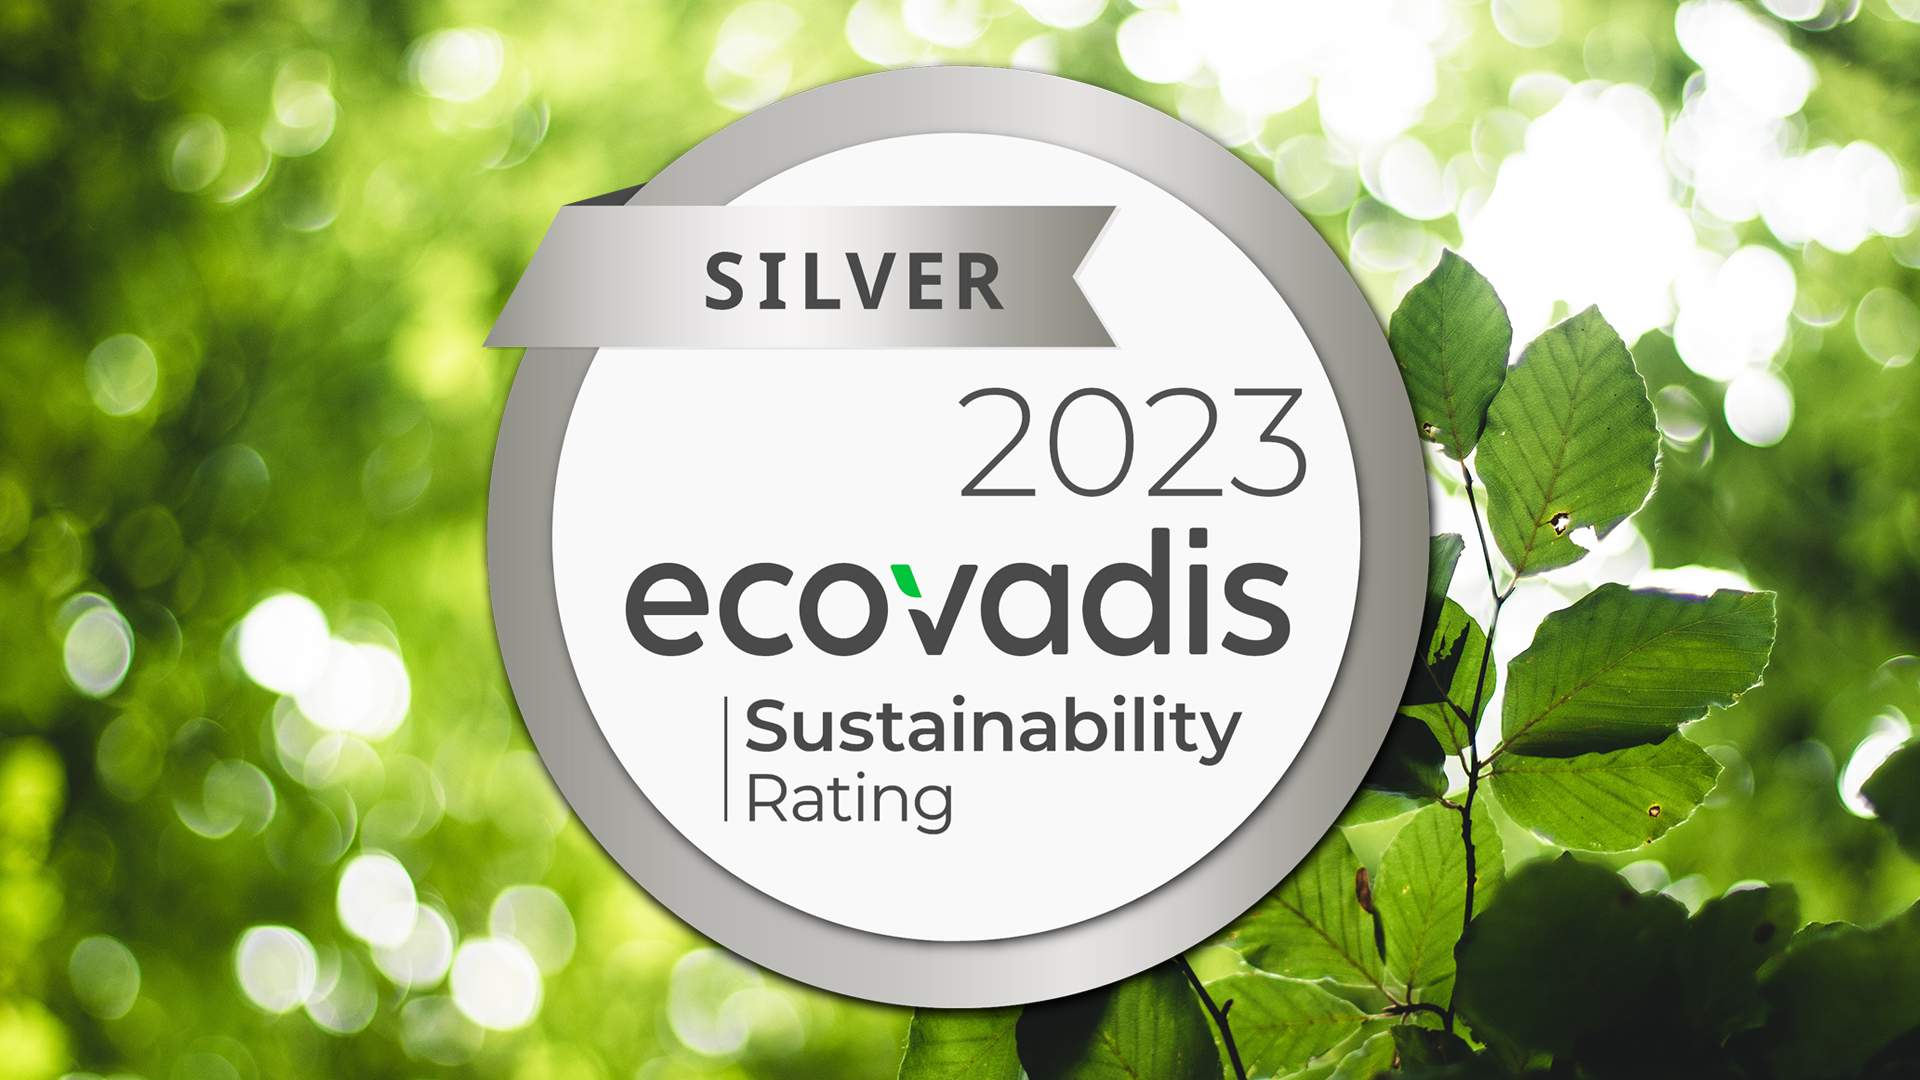 Ecovadis Sustainability Management circular silver award logo with a background of green leaves.